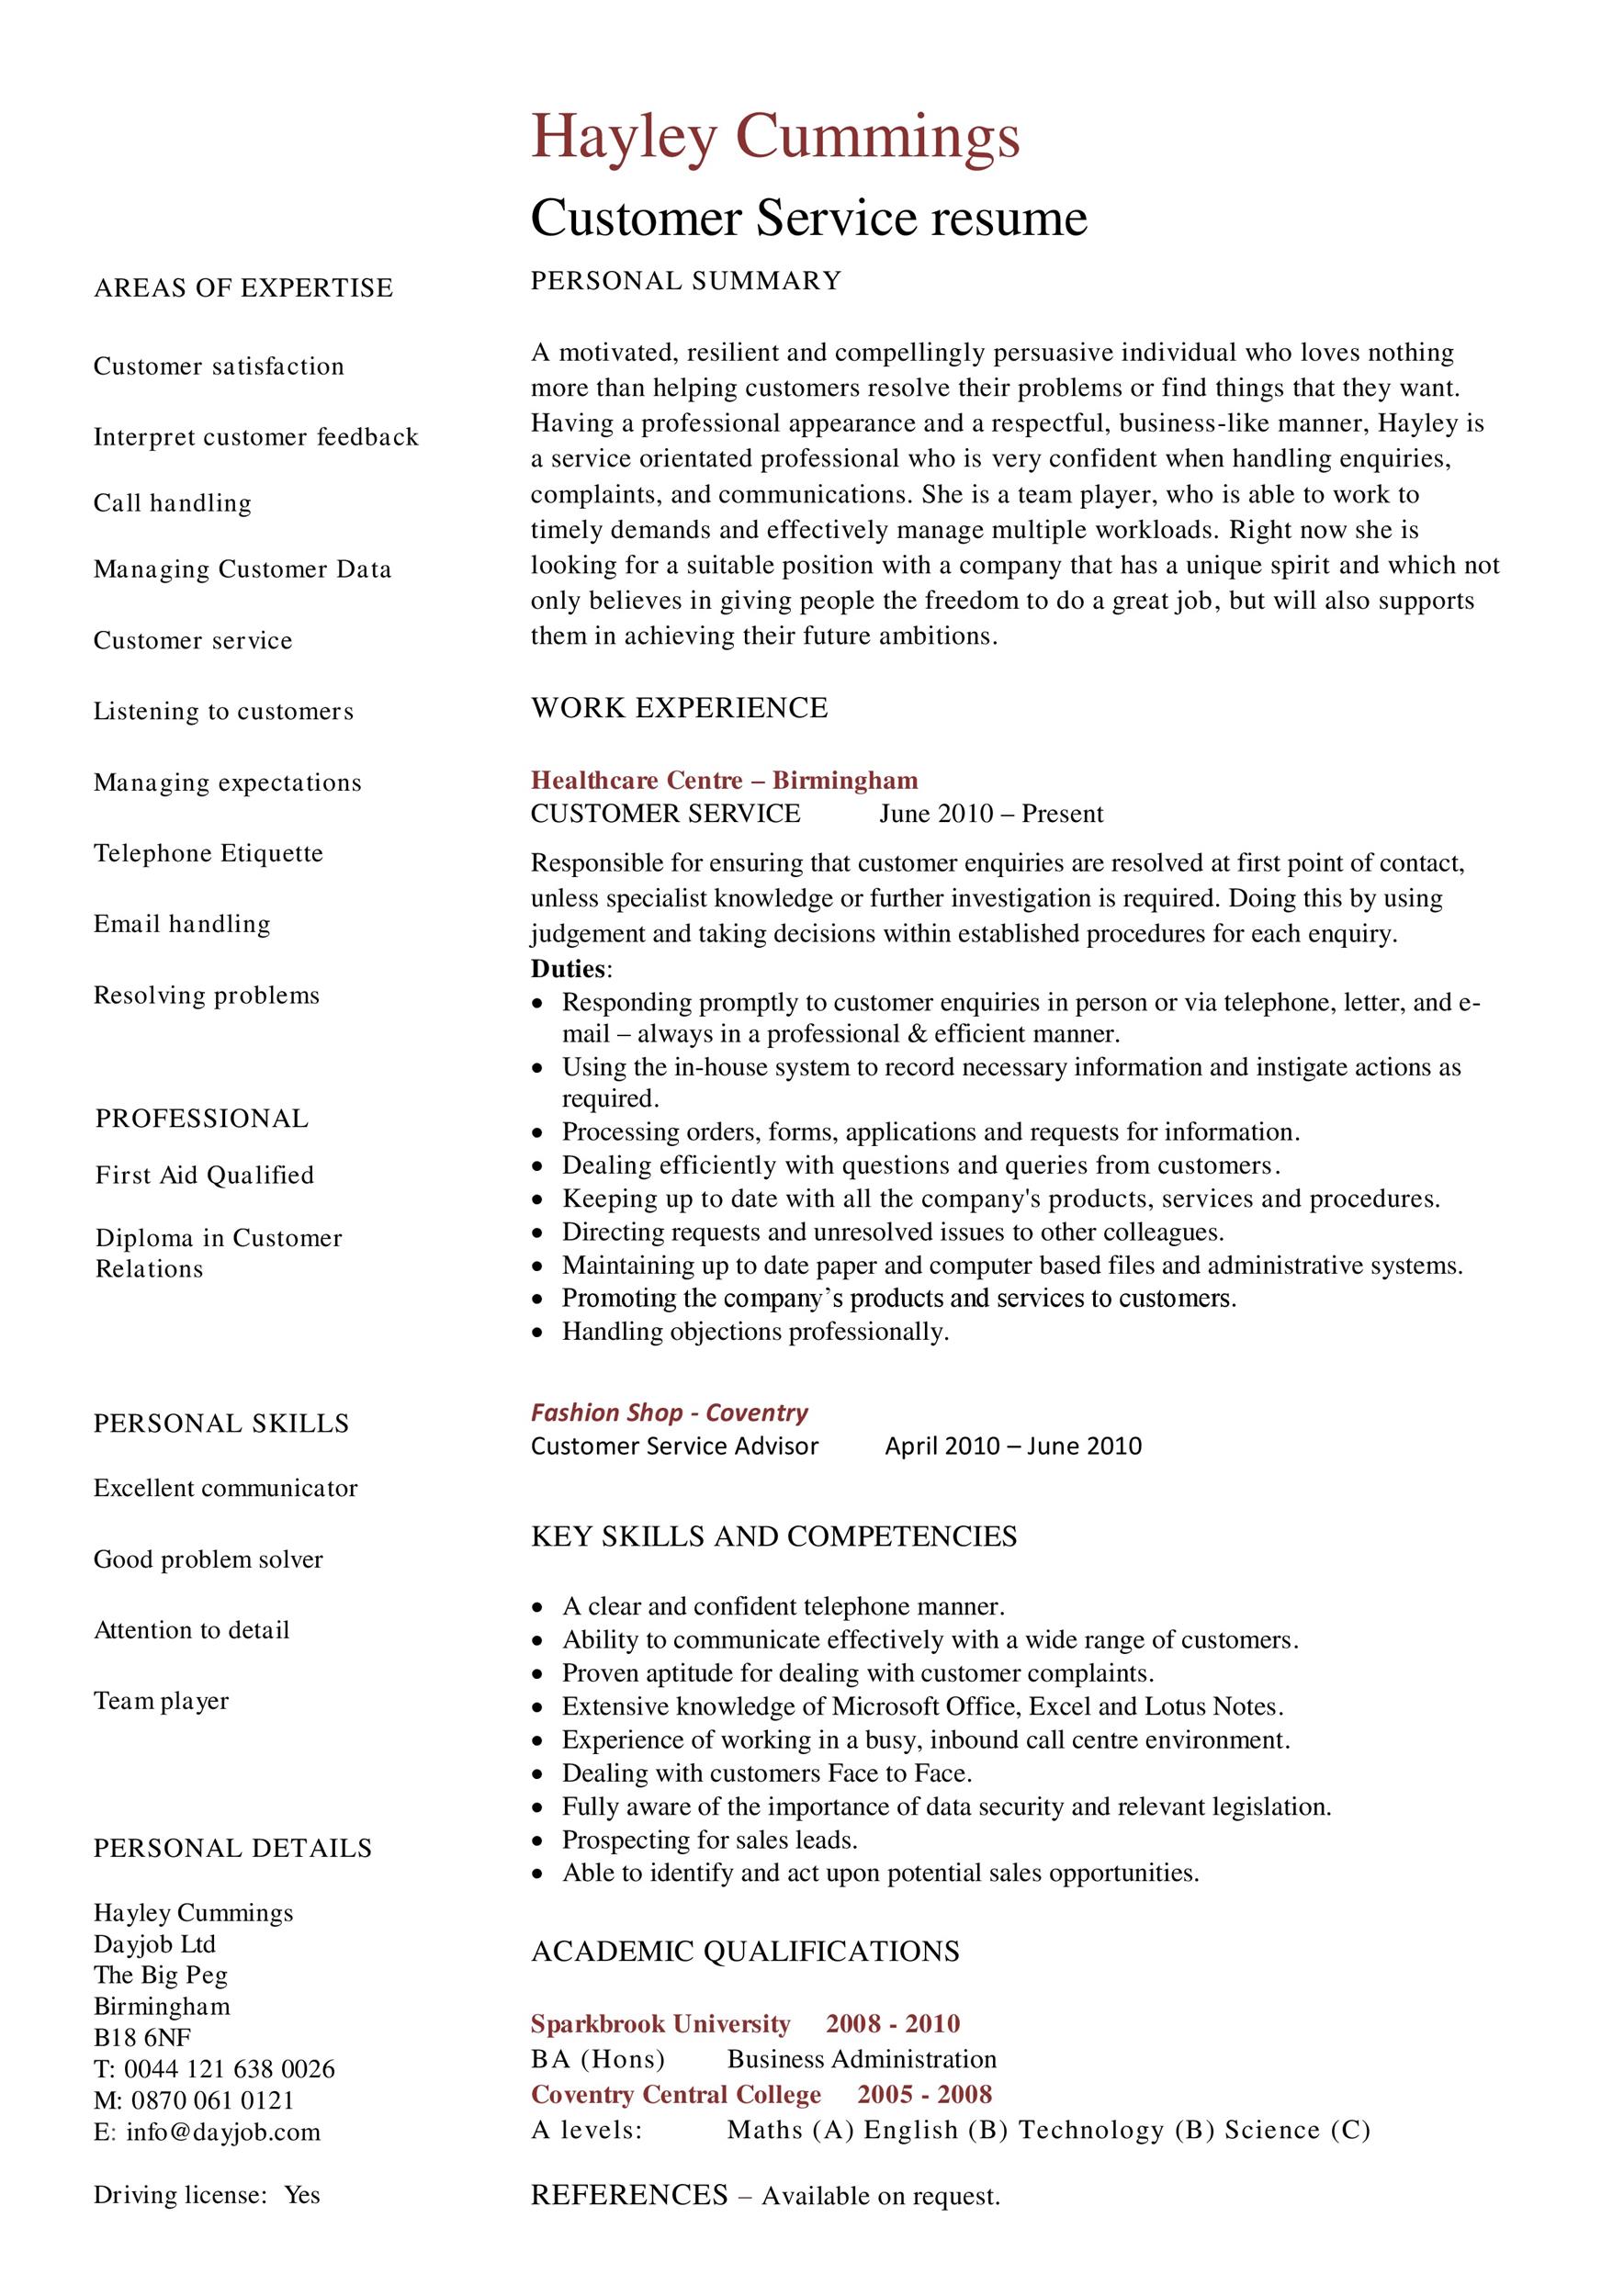 Architecture student resume objective examples